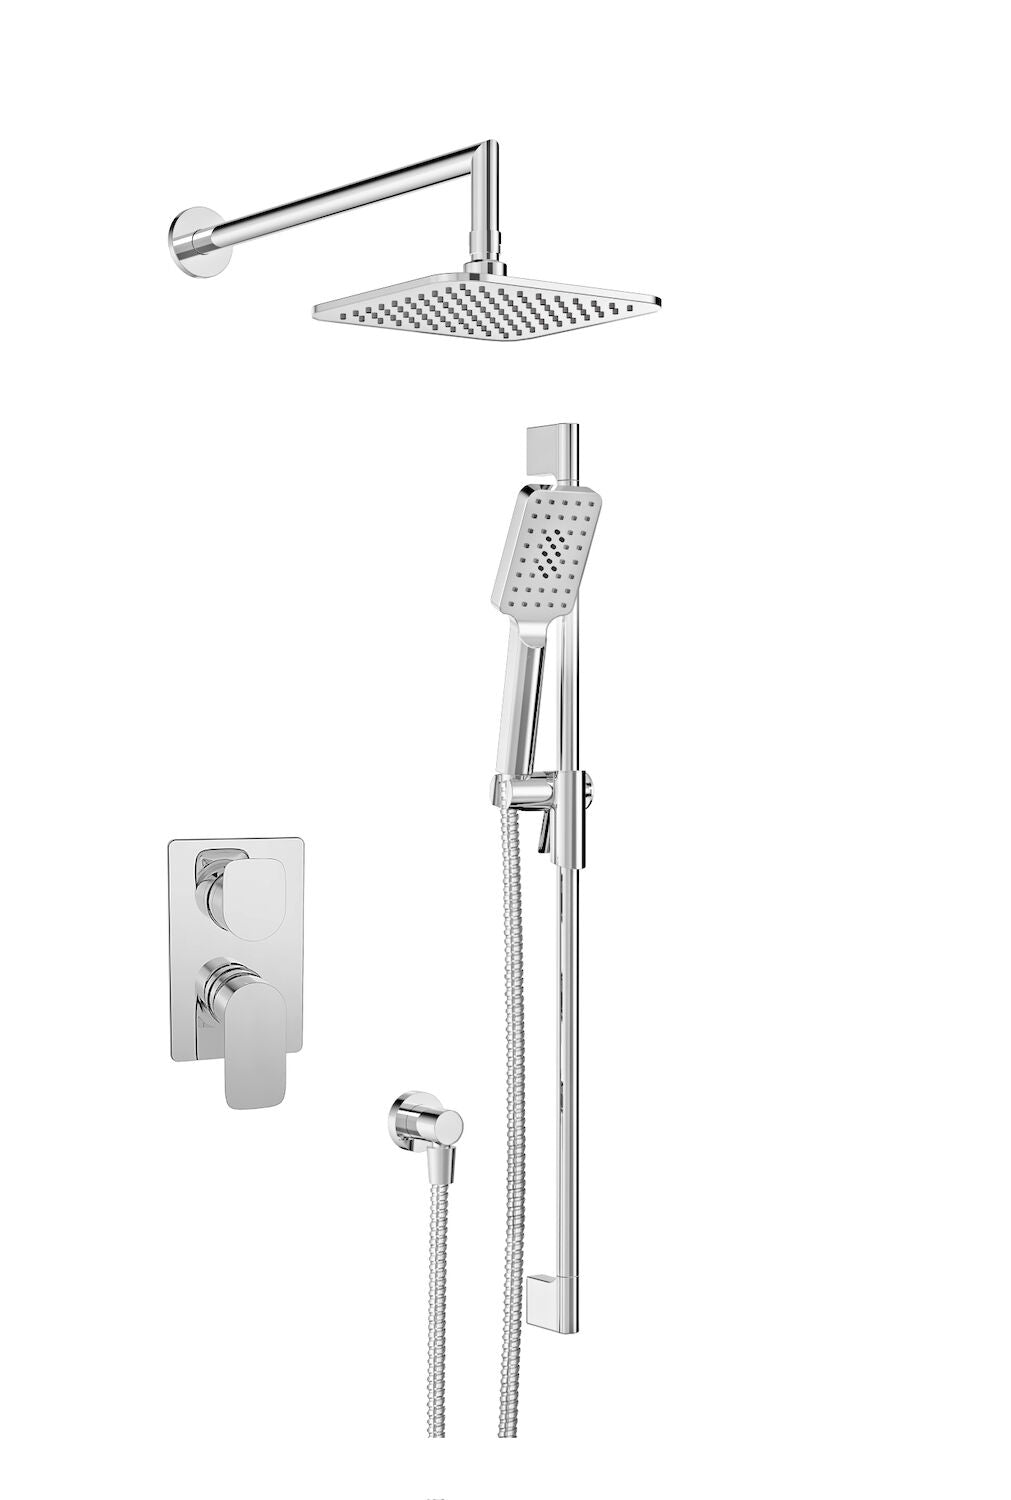 PETITE B04 2-FUNCTION COMPLETE PRESSURE BALANCED SHOWER TRIM KIT ONLY